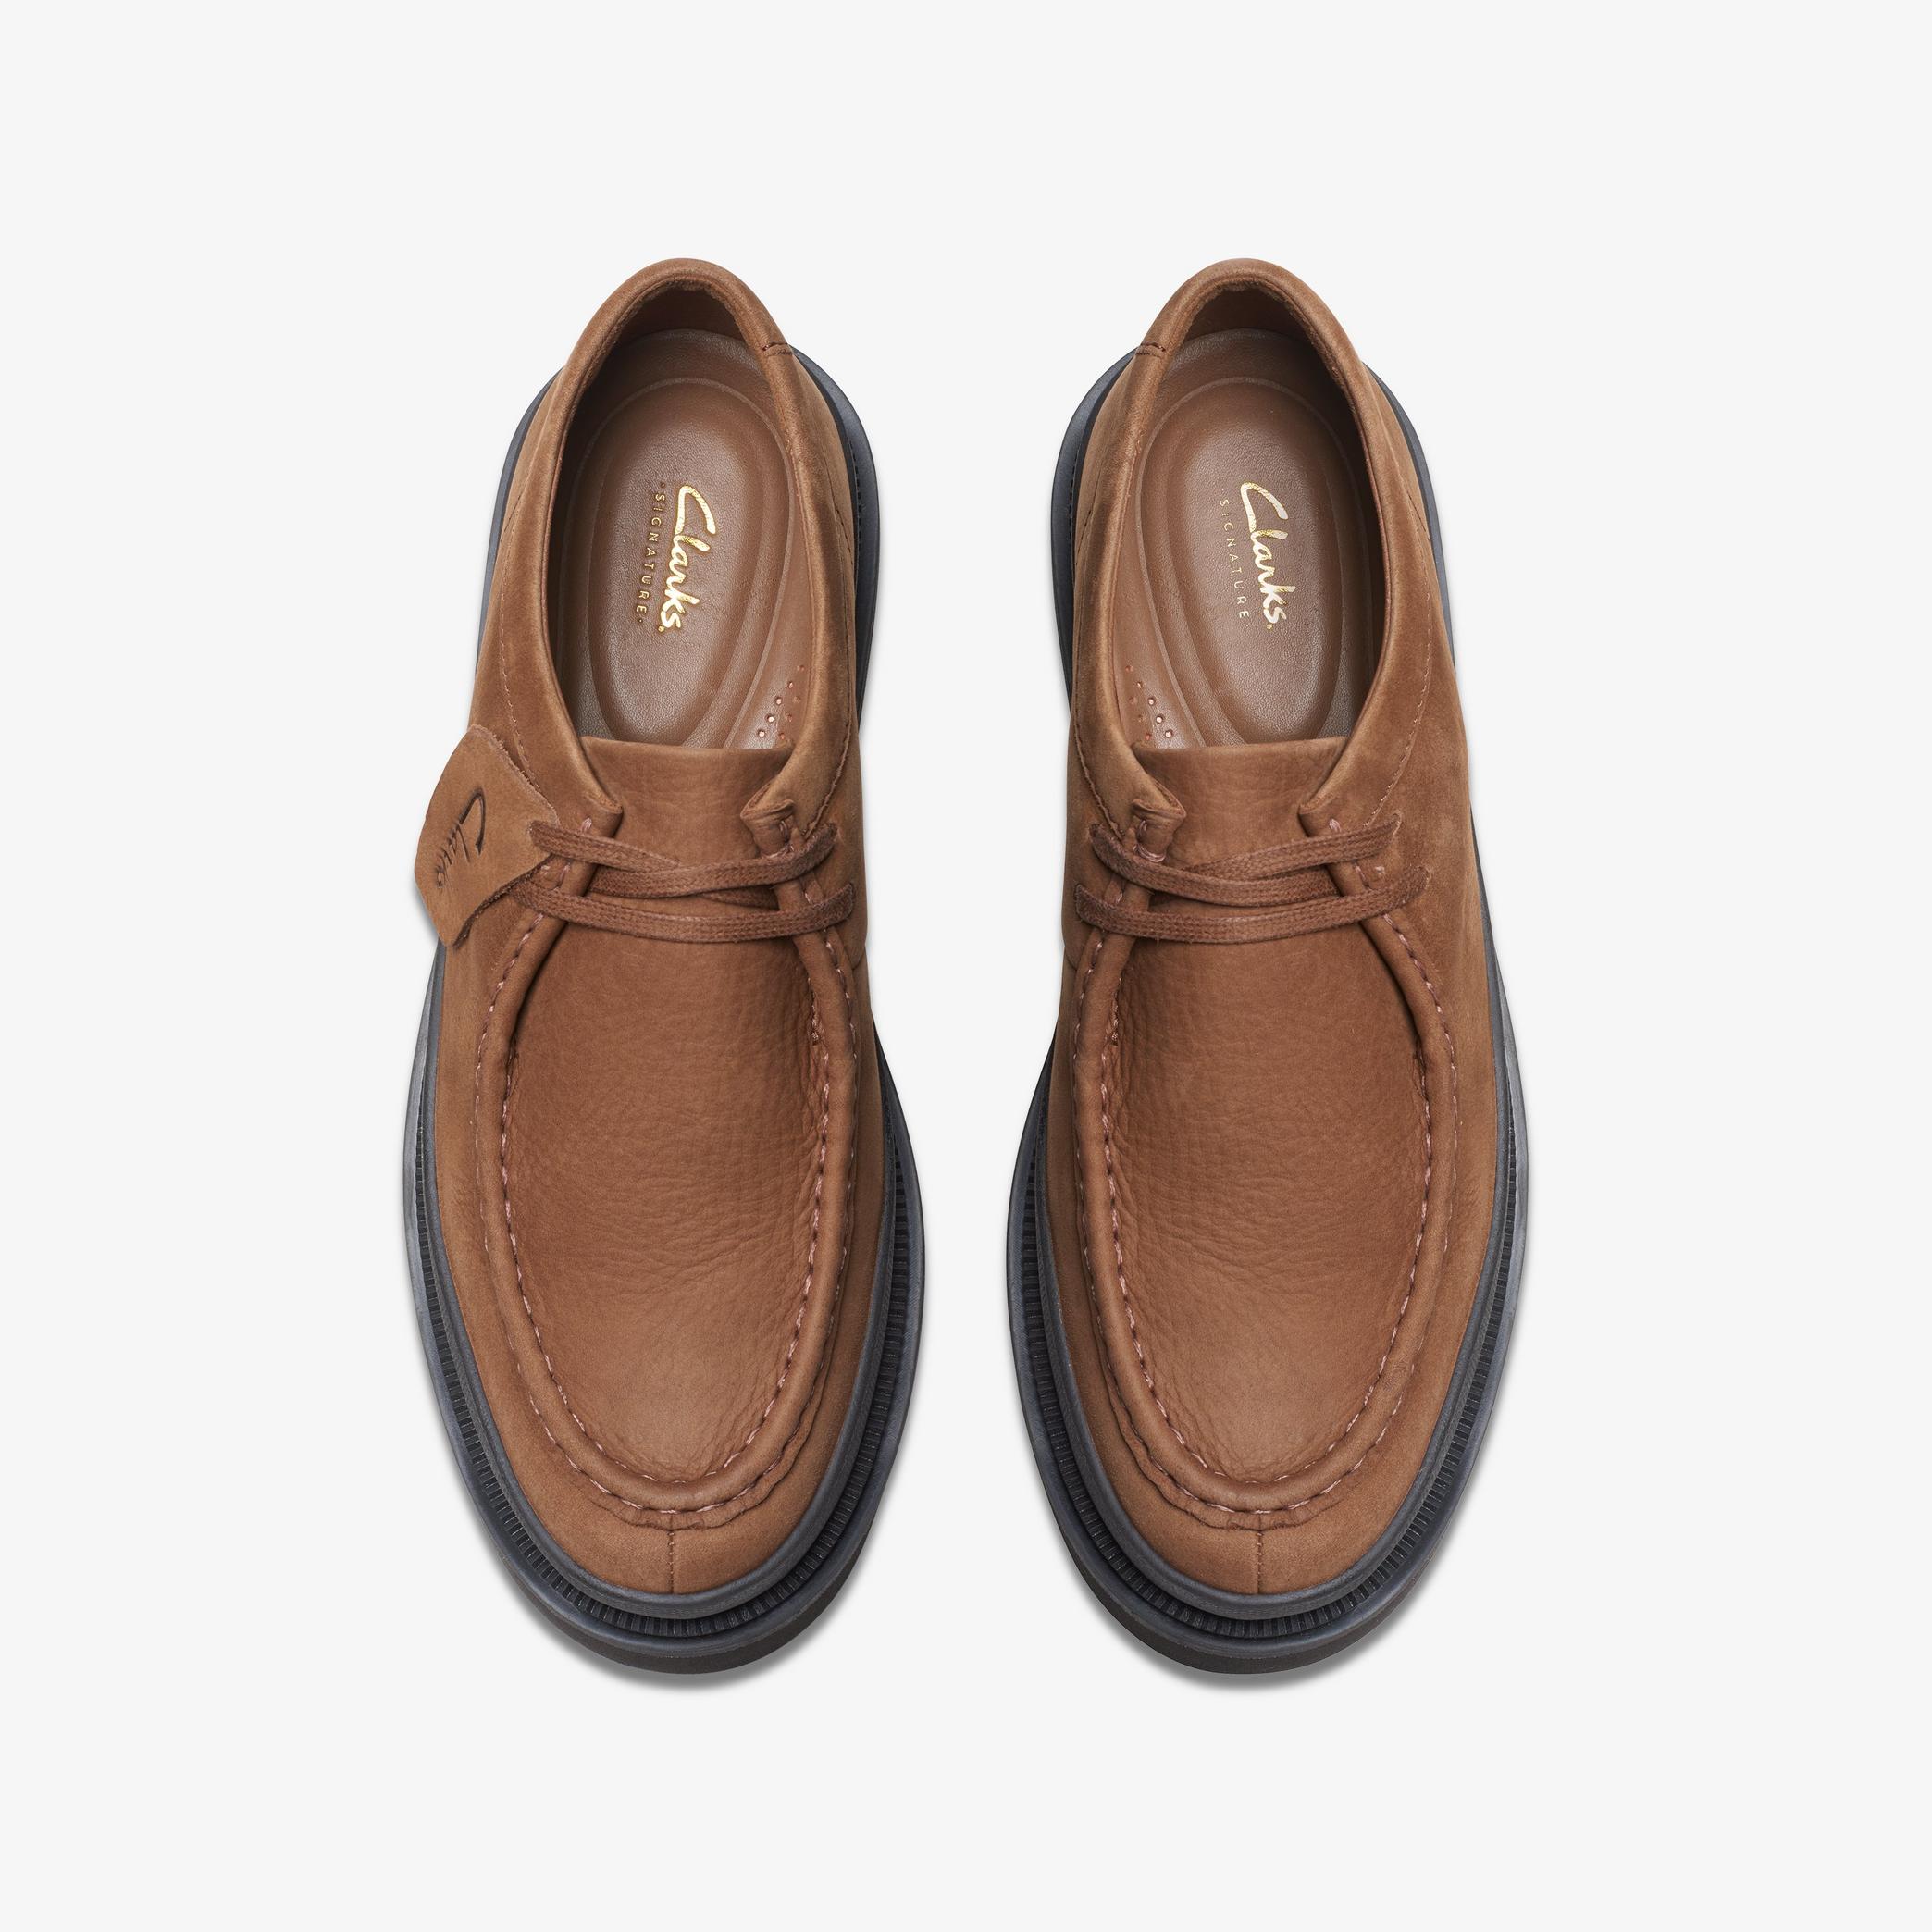 Badell Seam Cola Nubuck Shoes, view 6 of 6